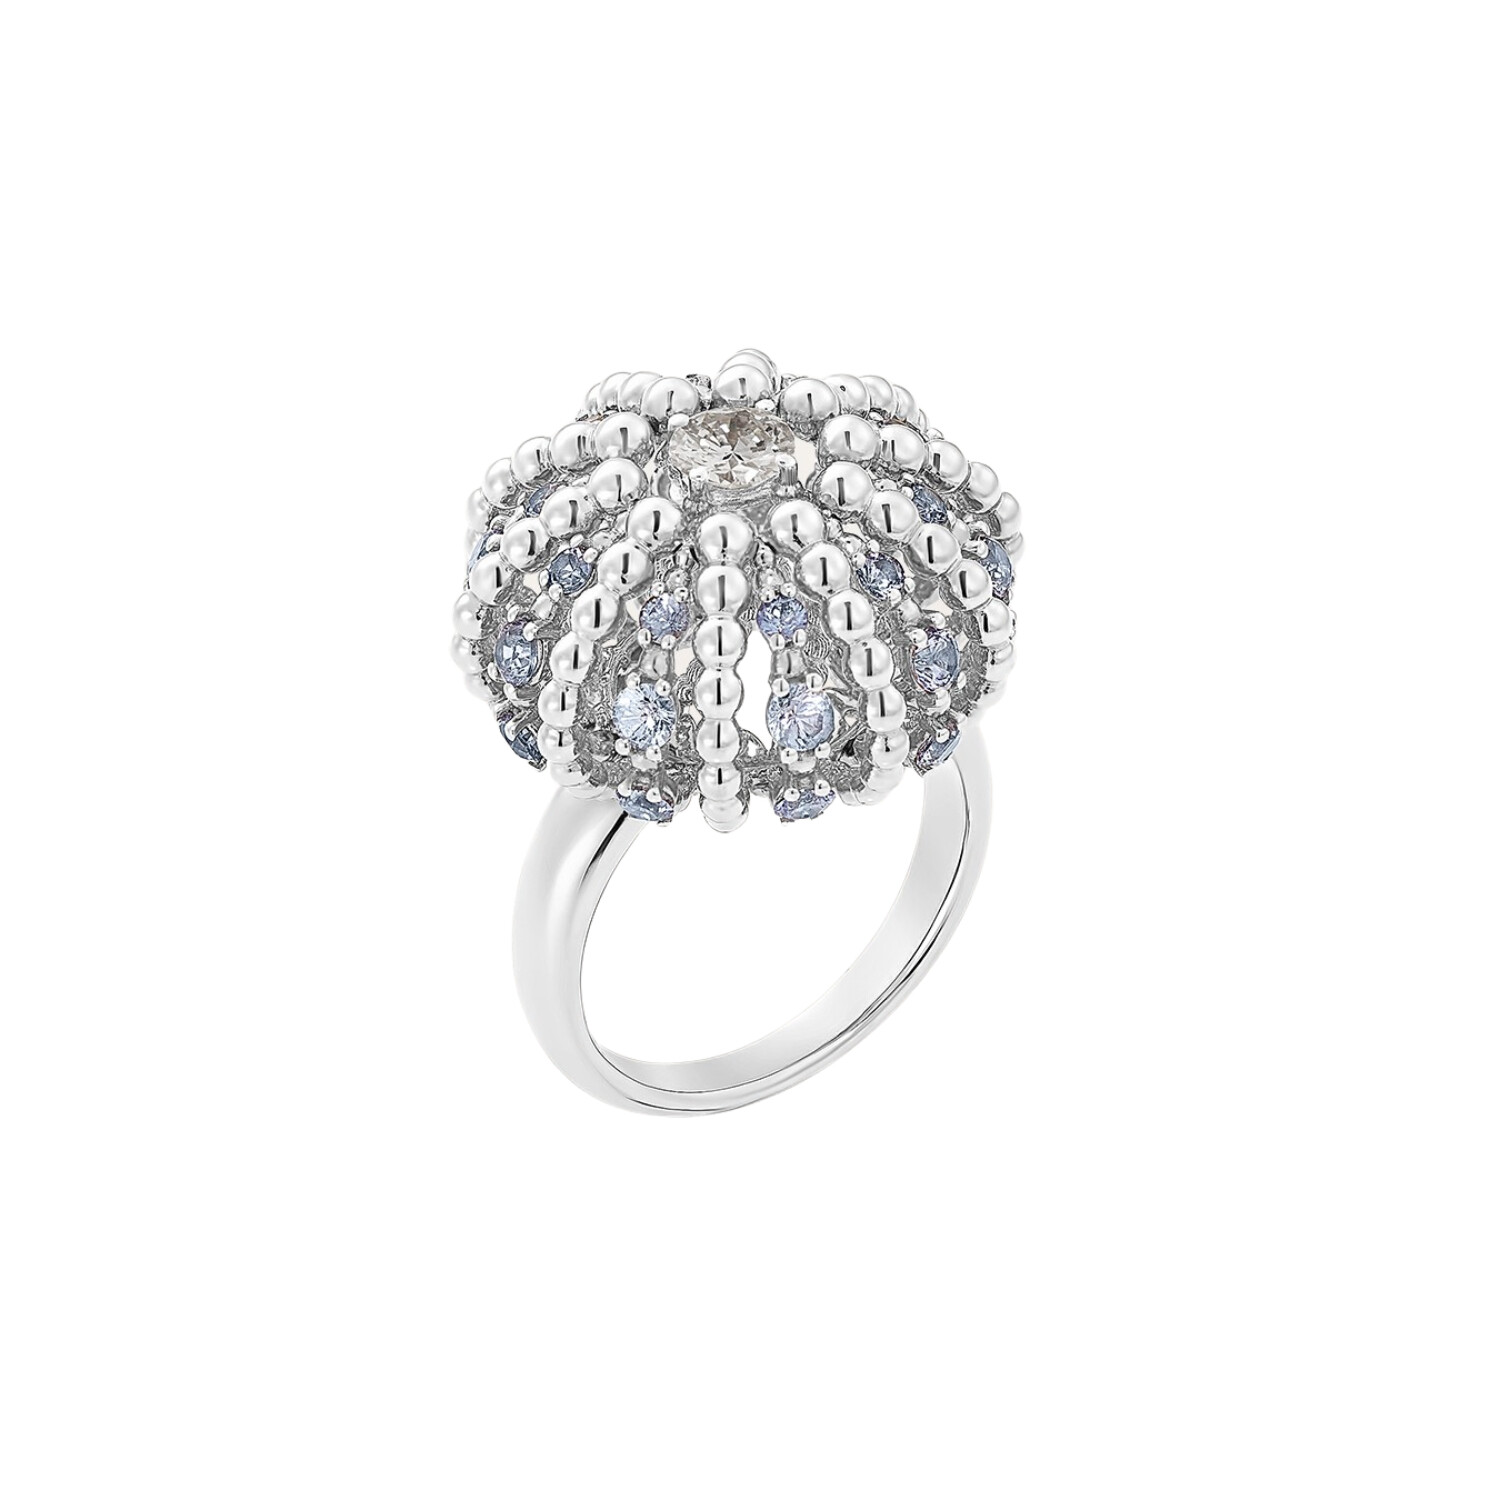 Purchase Barth Monte-Carlo Oursin ring, white gold, sapphires and diamonds